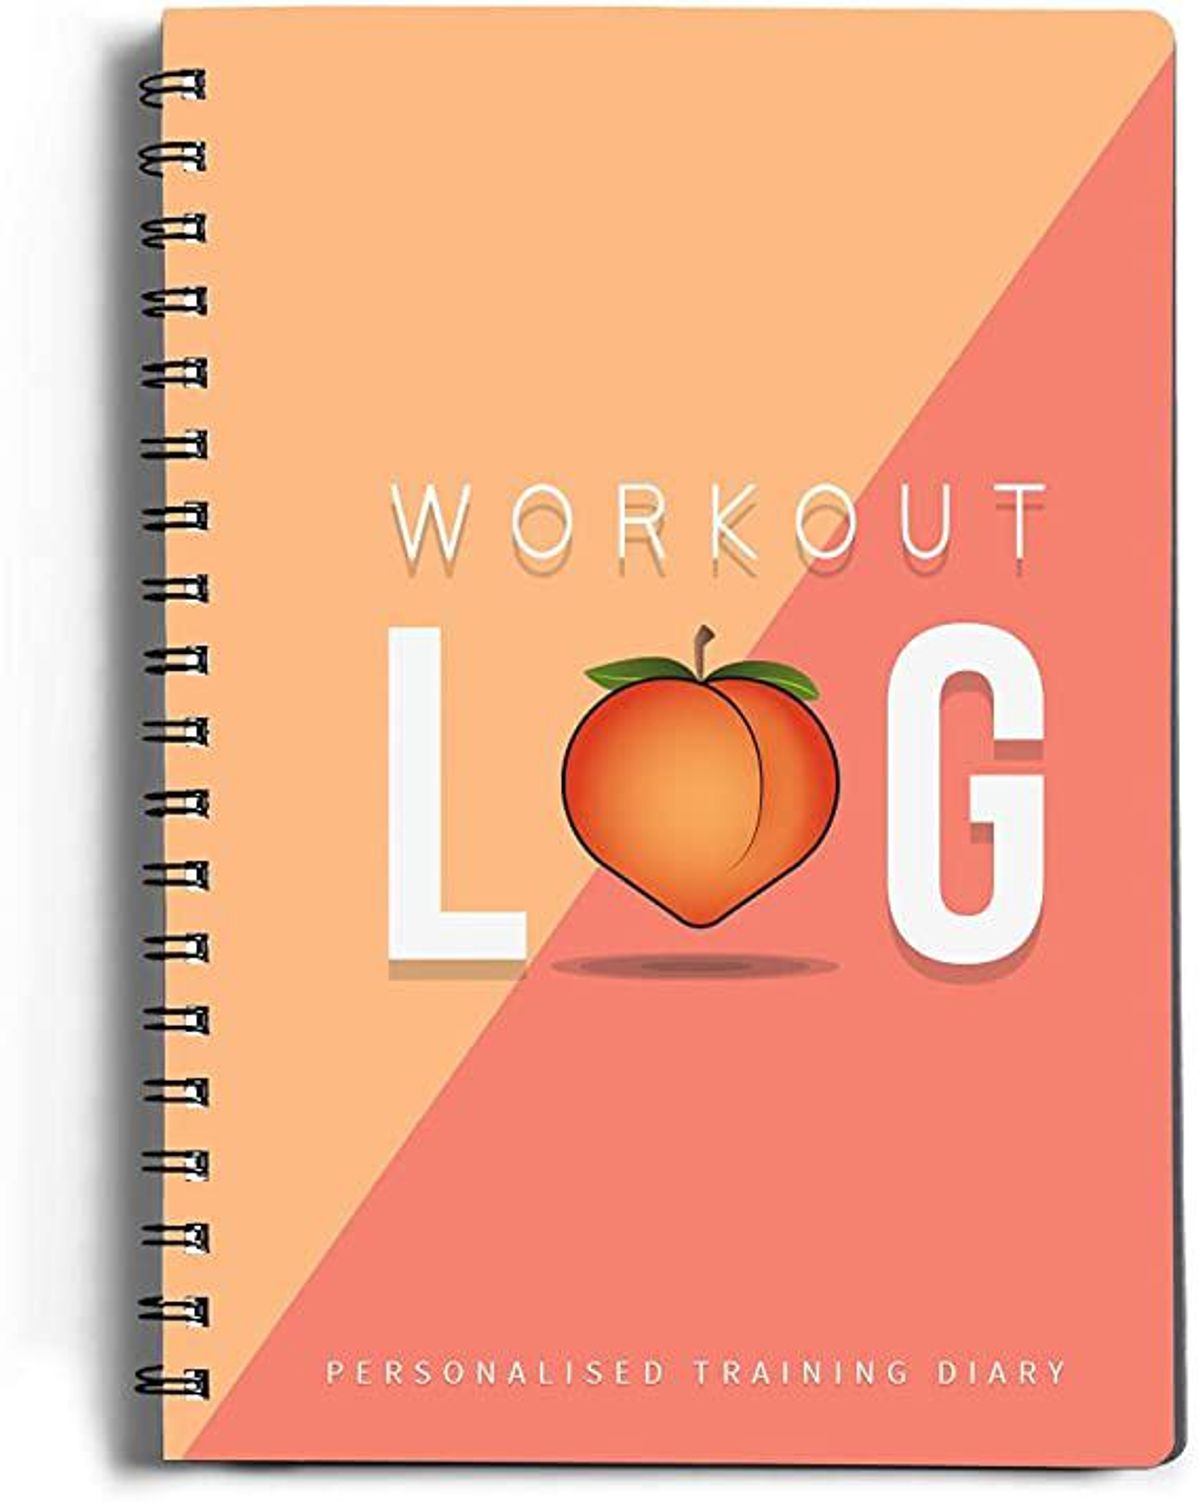 Gym, Fitness, and Training Diary